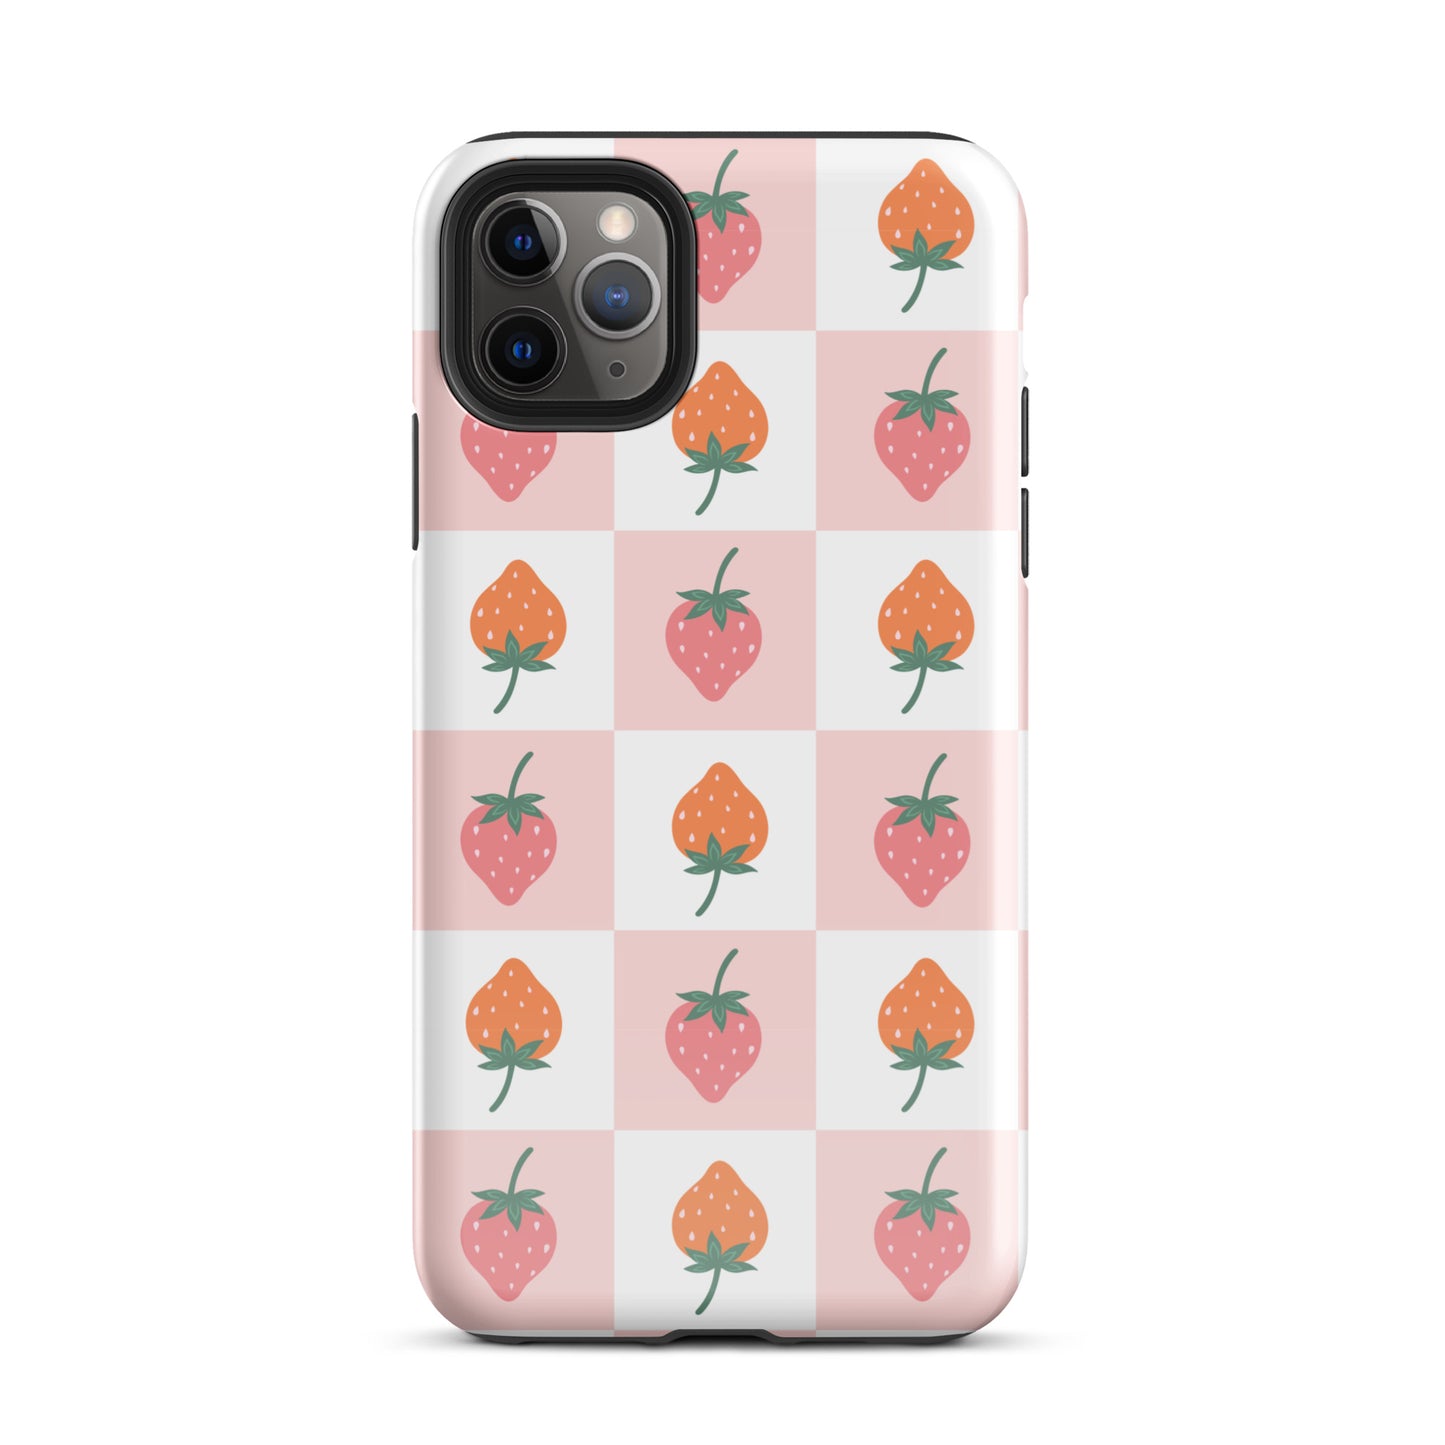 Strawberry Checkered iPhone Case iPhone 11 Pro Max Glossy